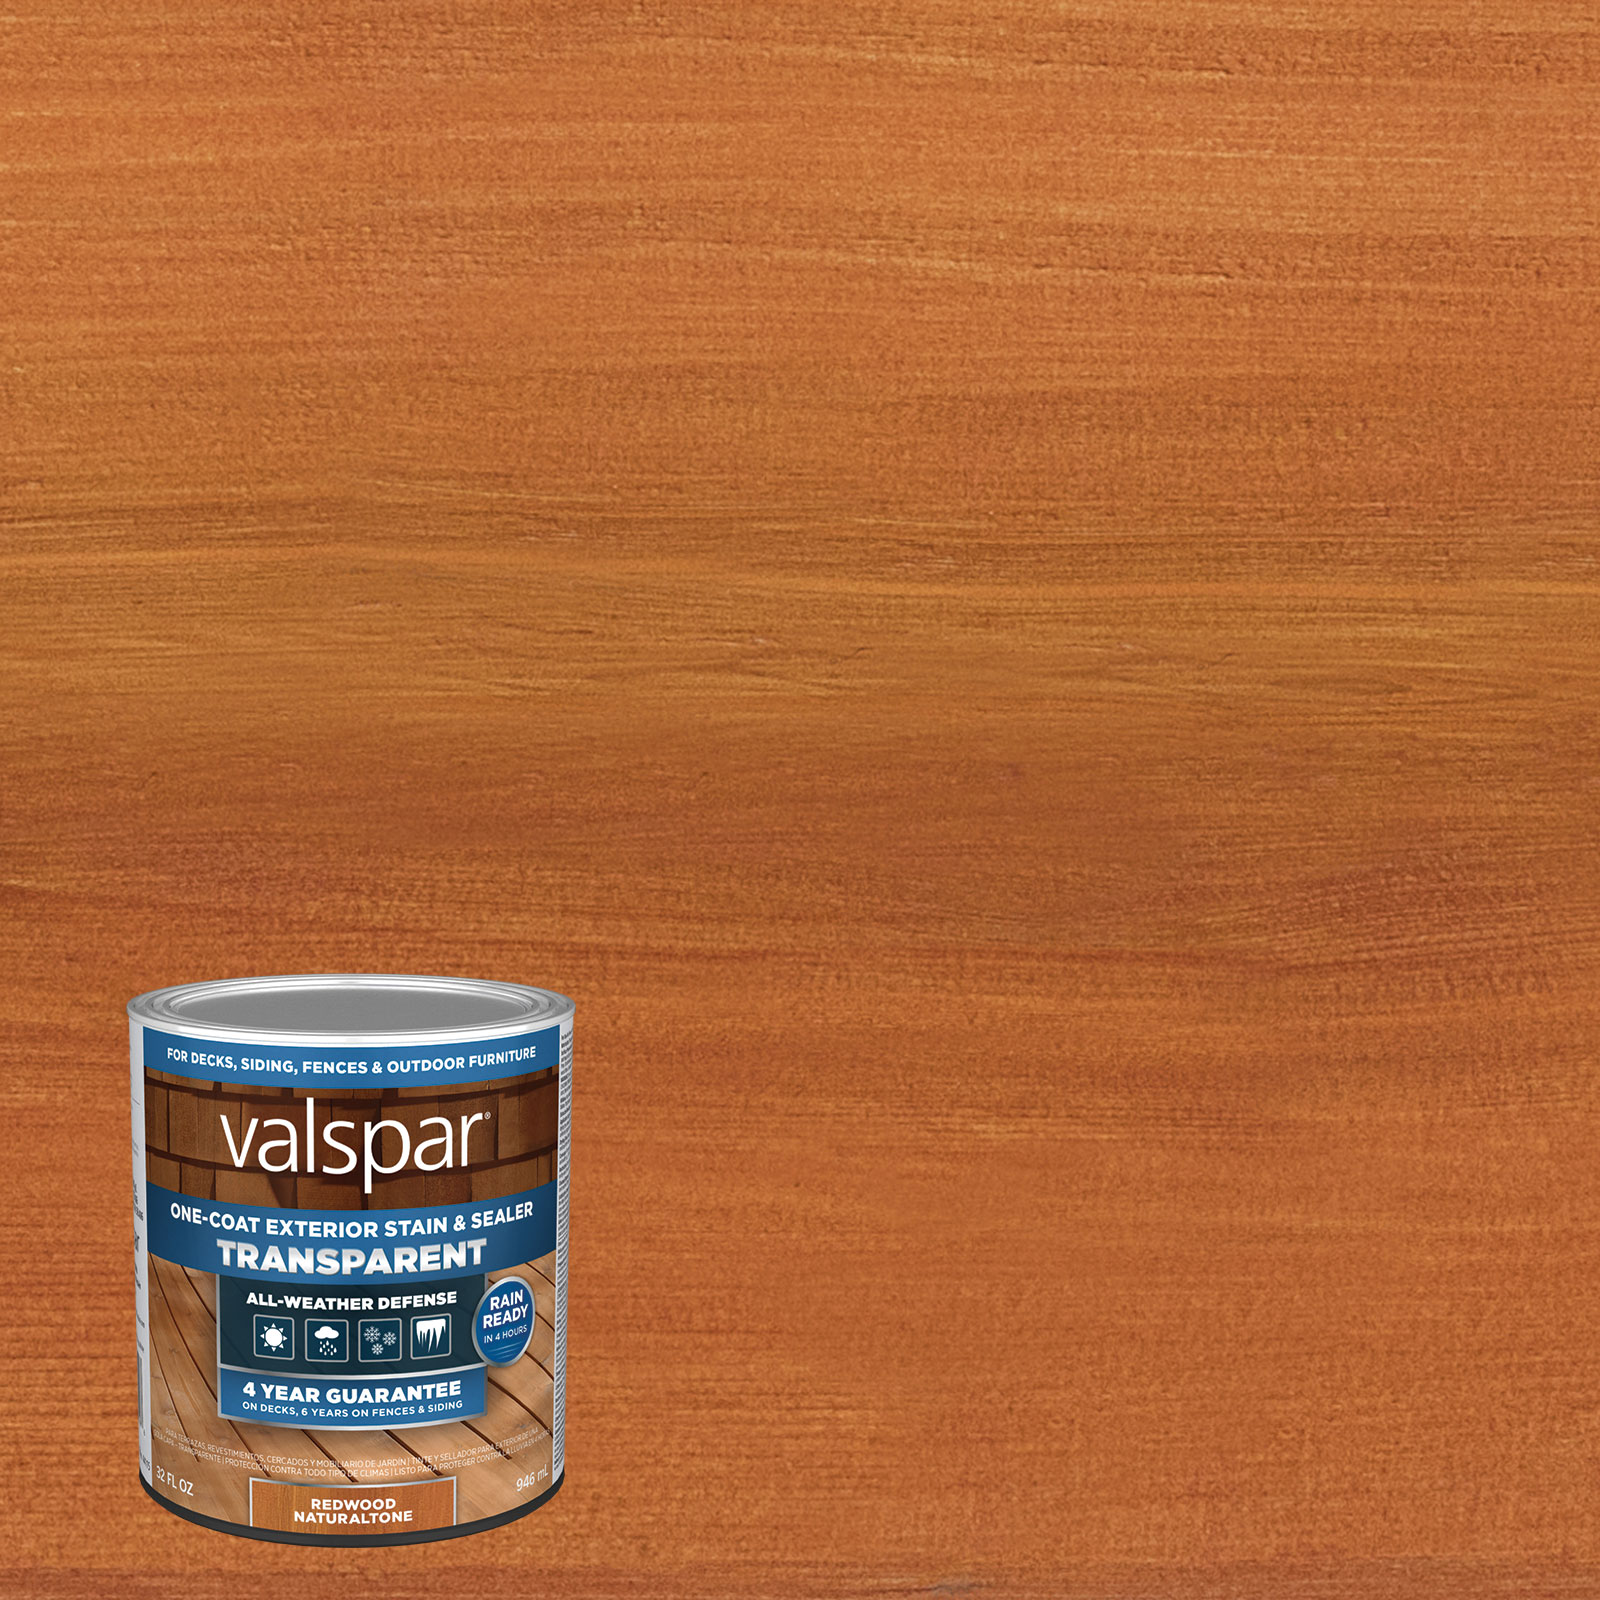 Oil-Latex Redwood Stain for Your Next Project